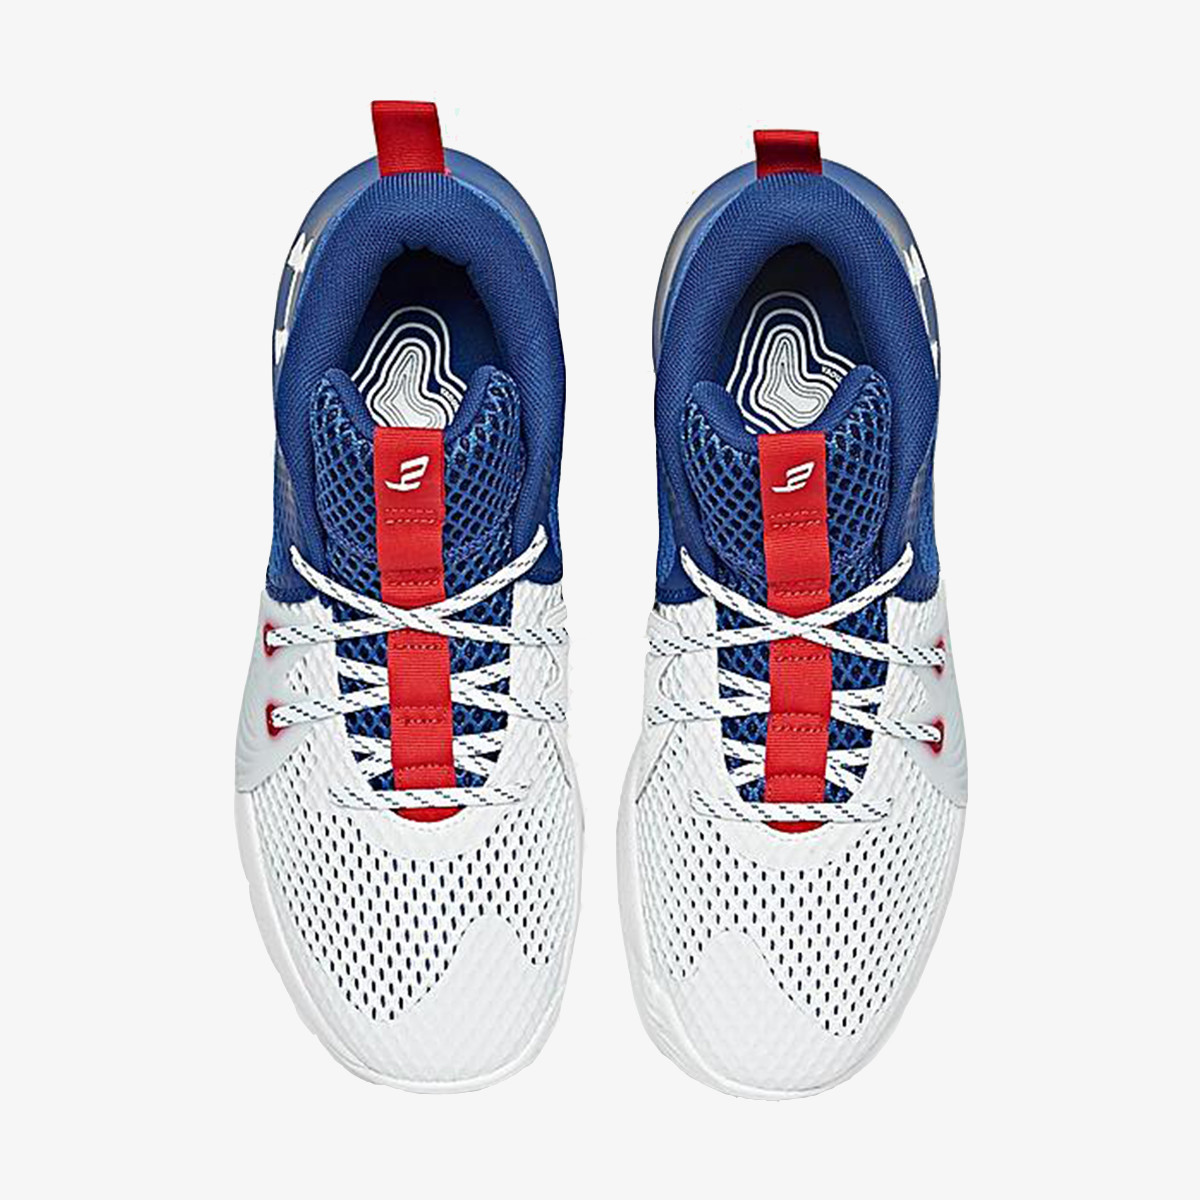 Under Armour UA Embiid One Basketball Shoes 